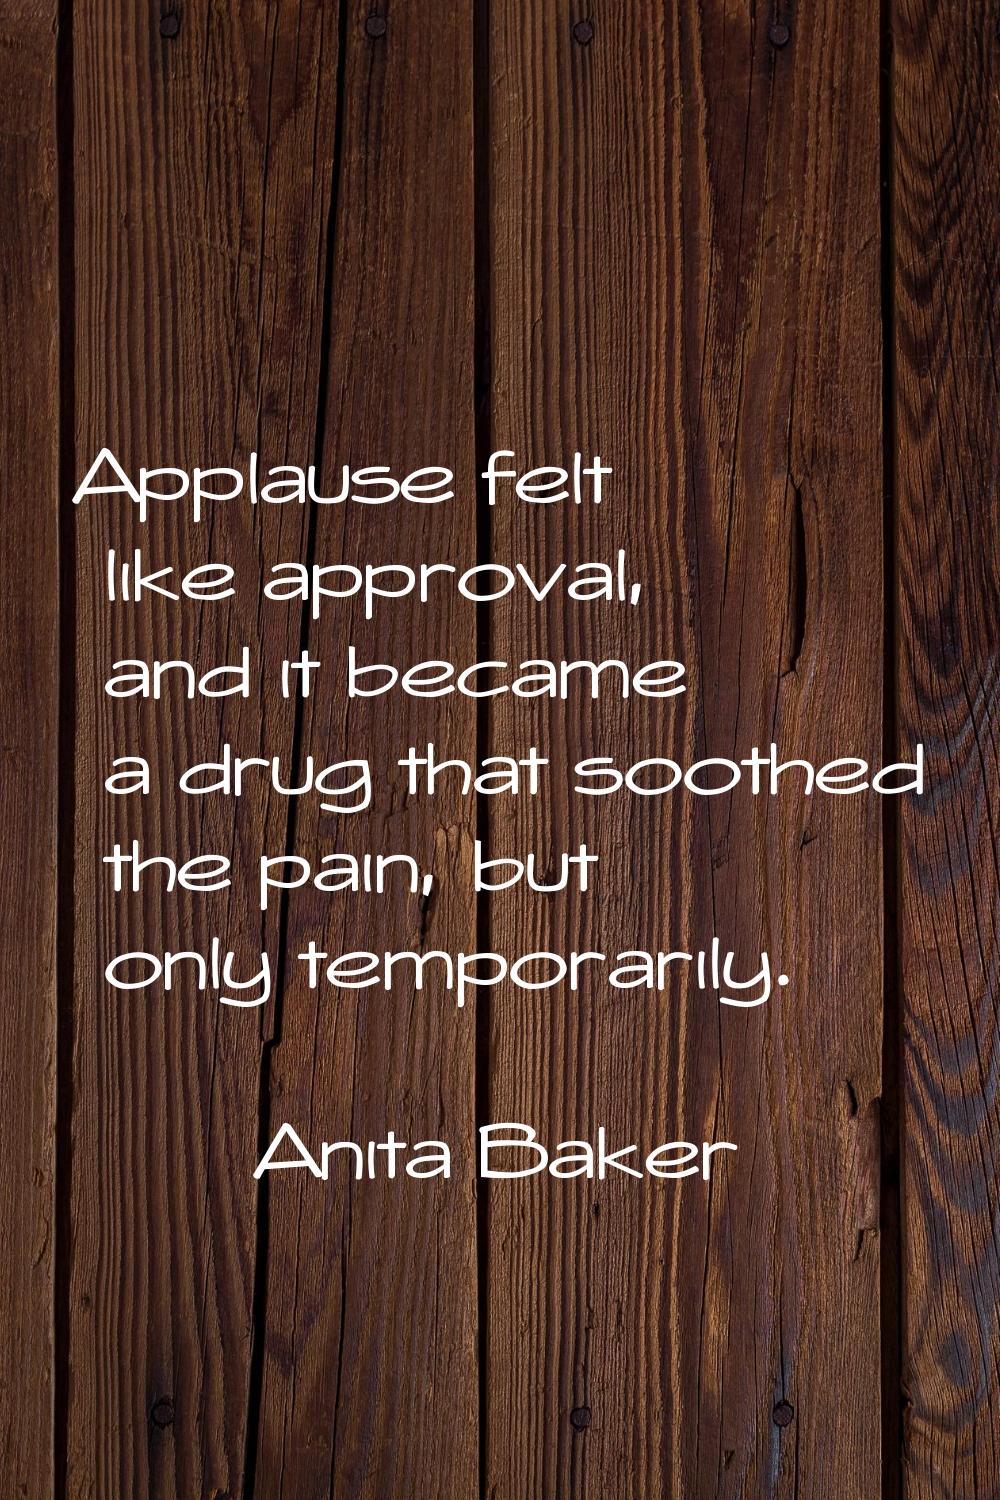 Applause felt like approval, and it became a drug that soothed the pain, but only temporarily.